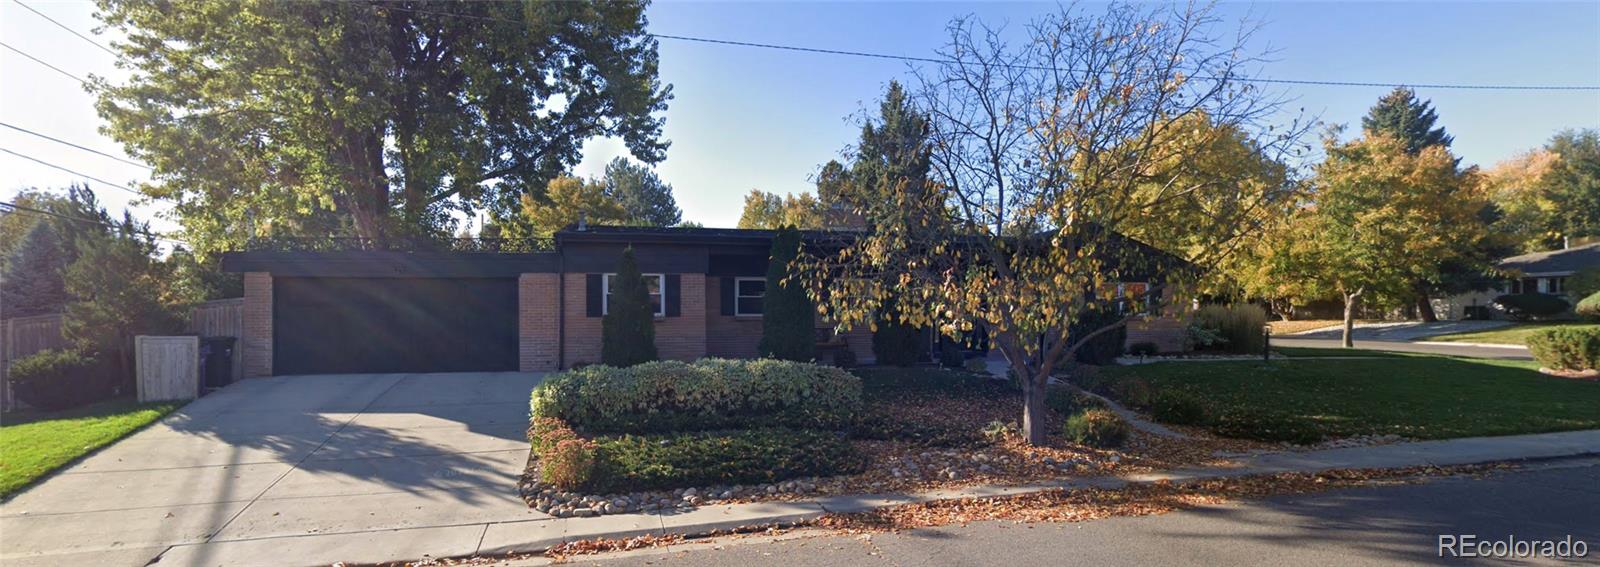 200 s jersey street, Denver sold home. Closed on 2024-03-14 for $951,647.